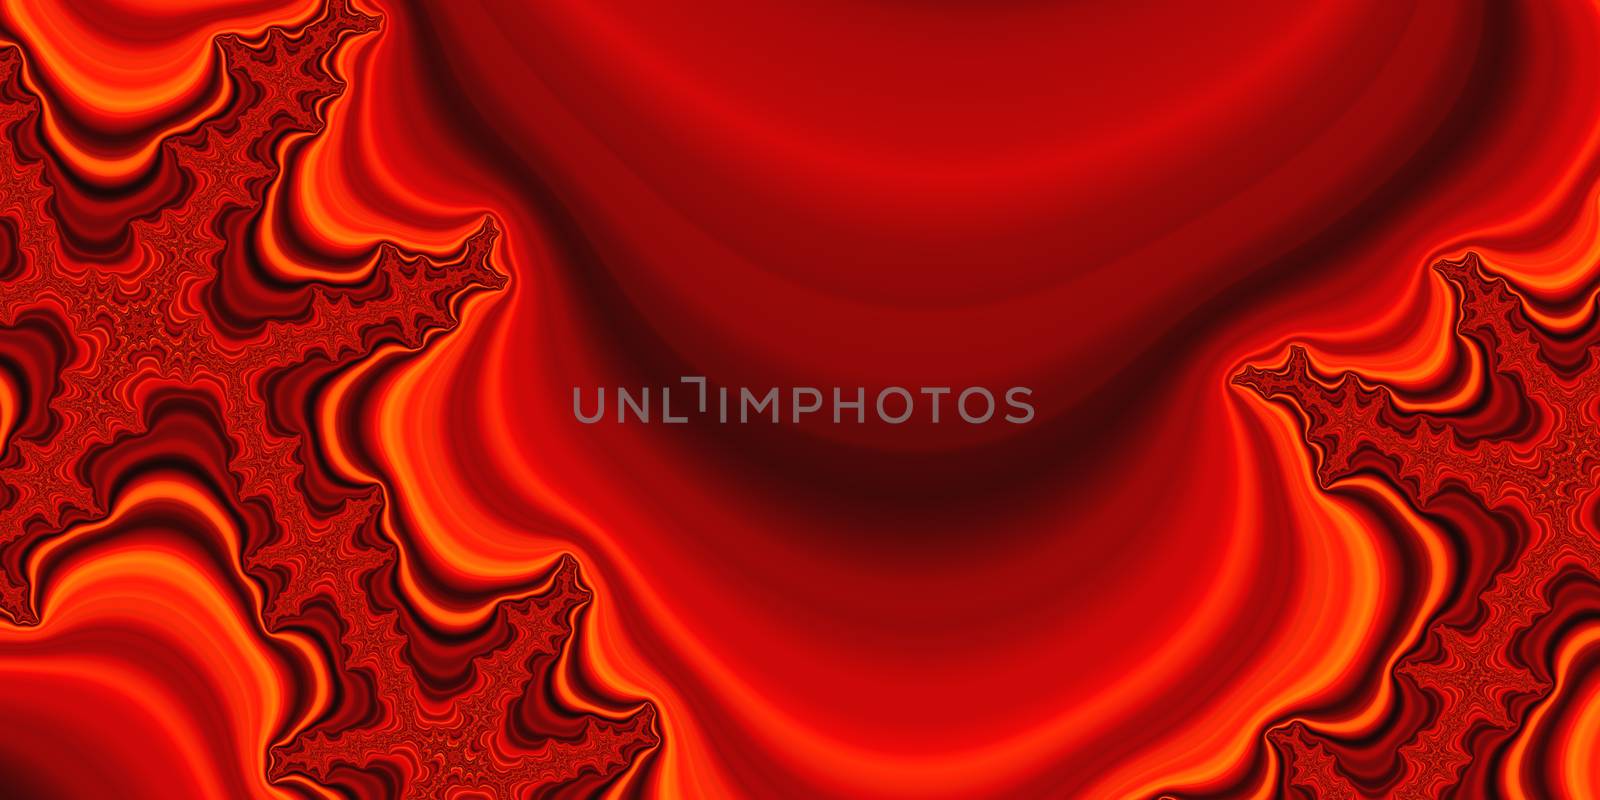 An abstract fractal design representing silk or velvet material in red, orange and black colors.